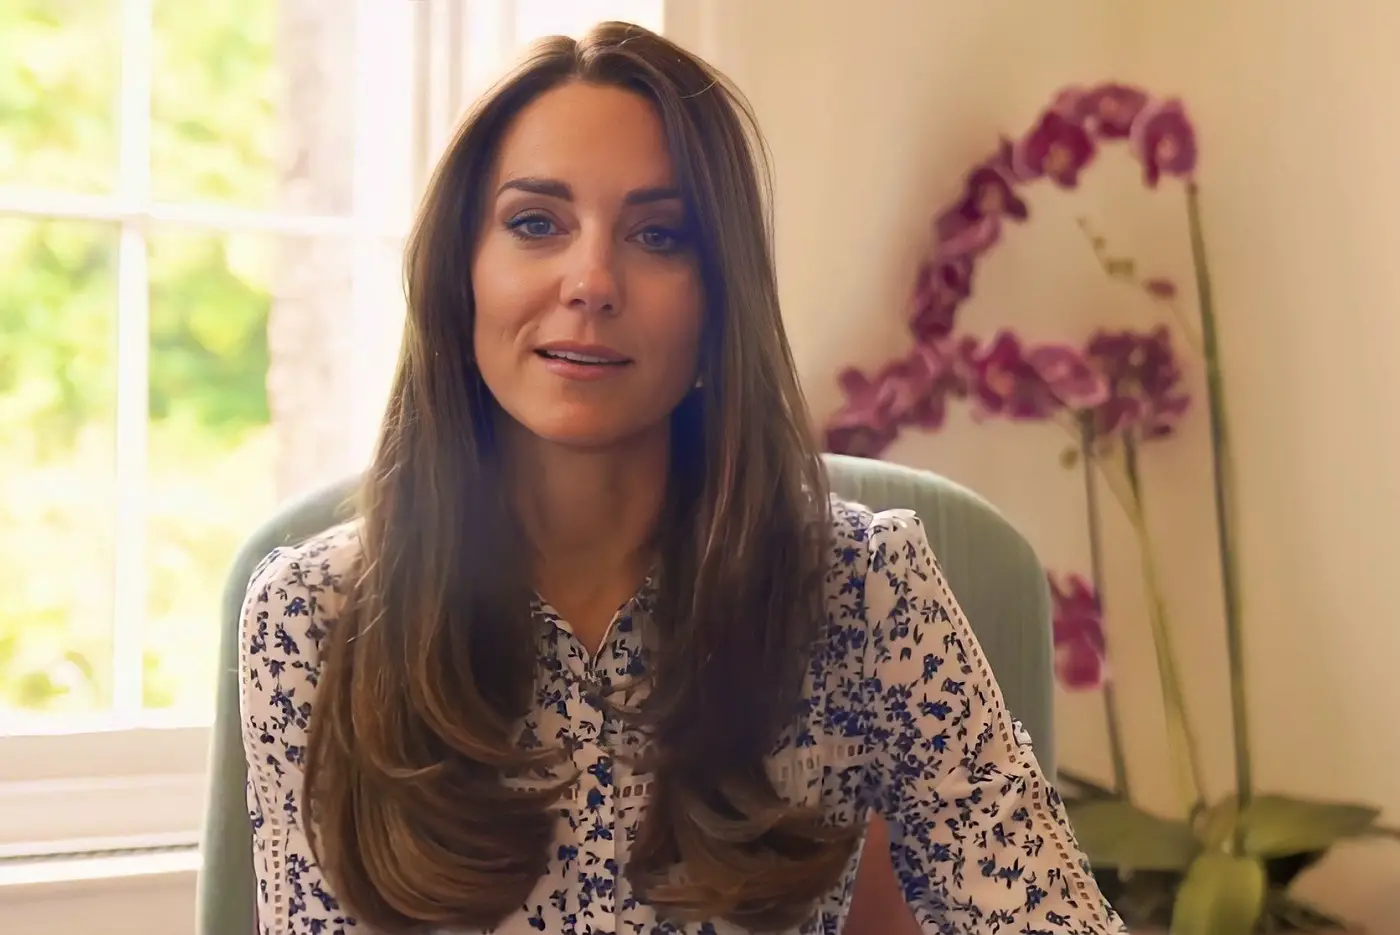 The Duchess of Cambridge became the Royal Patron of the Maternal Mental Health Alliance